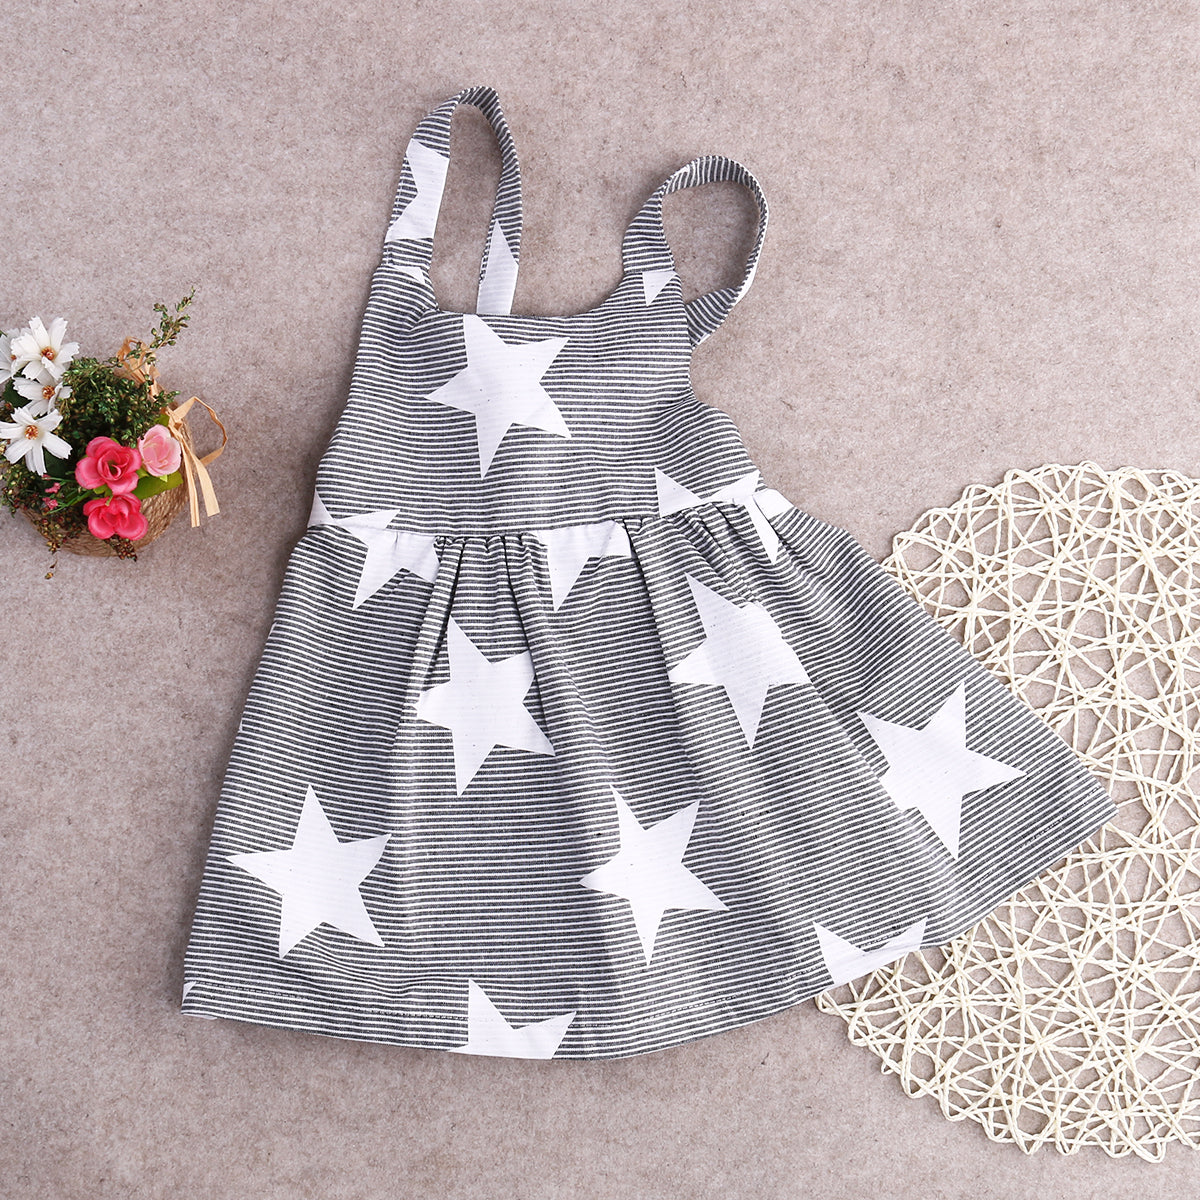 Infant kids Baby Girls Dress Star Birthday Party Pageant Summer Sundress Dresses - ebowsos